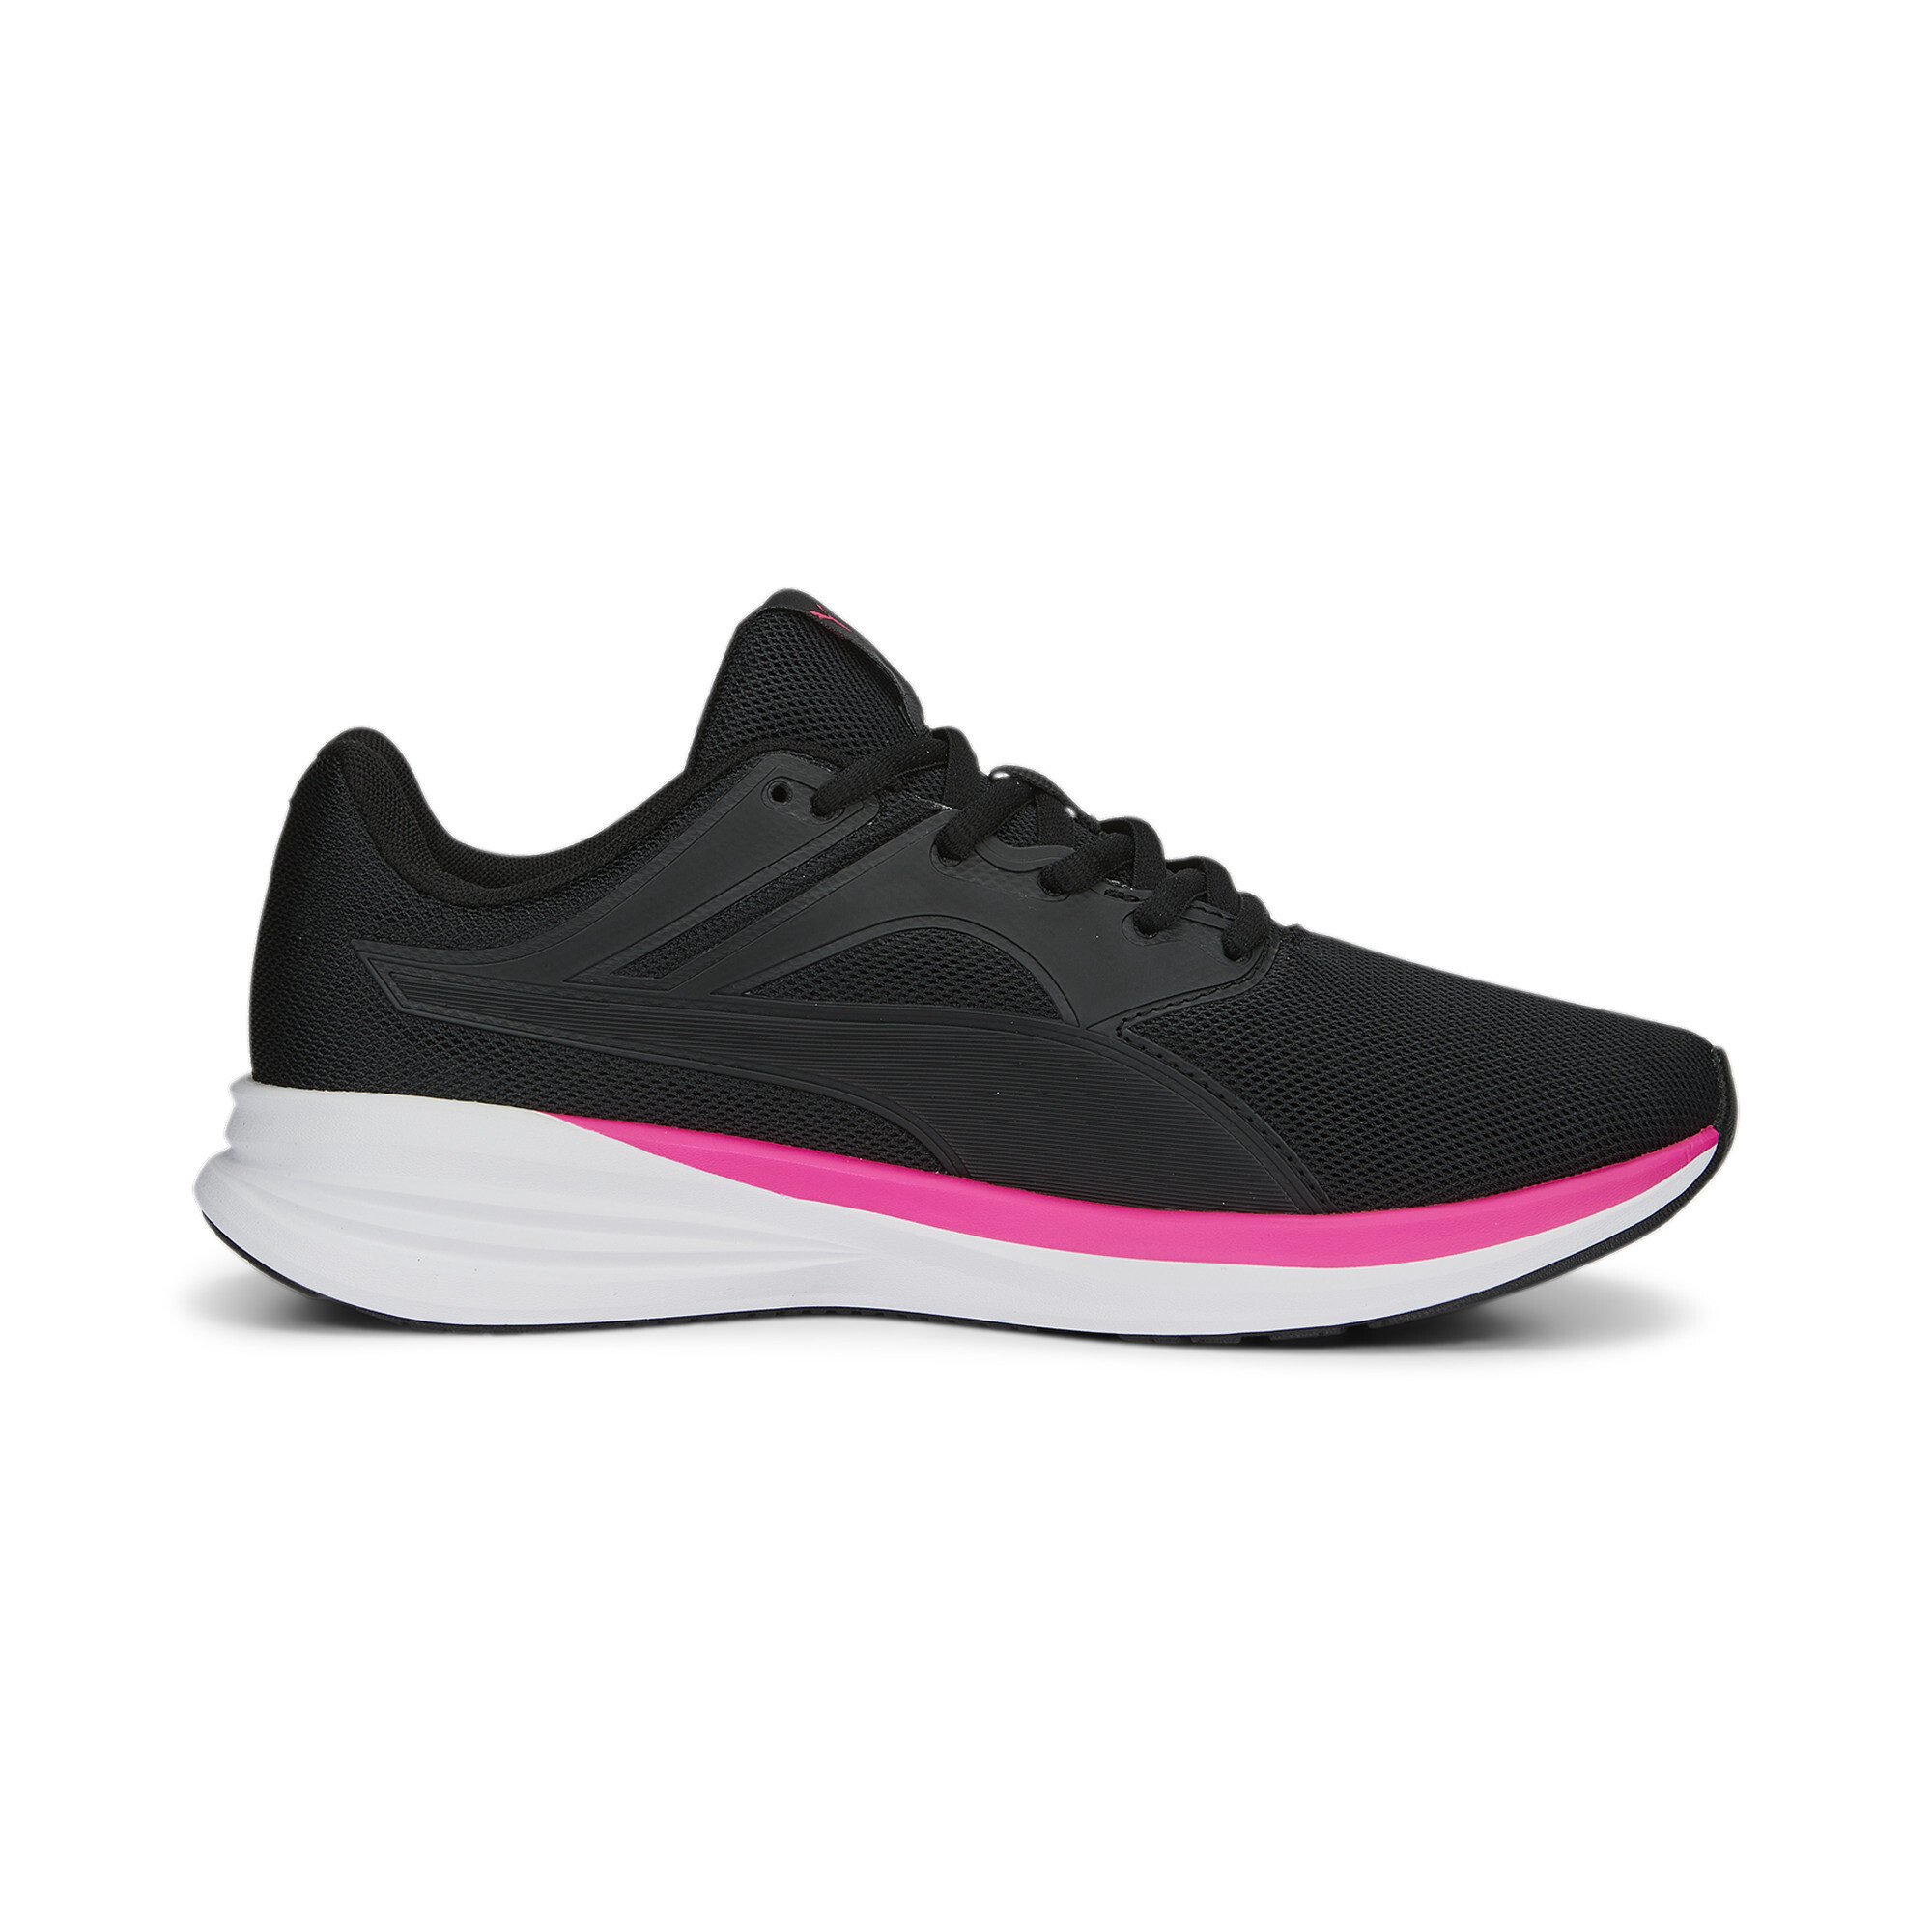 Puma Transport Running Shoes, Black, Size 39, Shoes